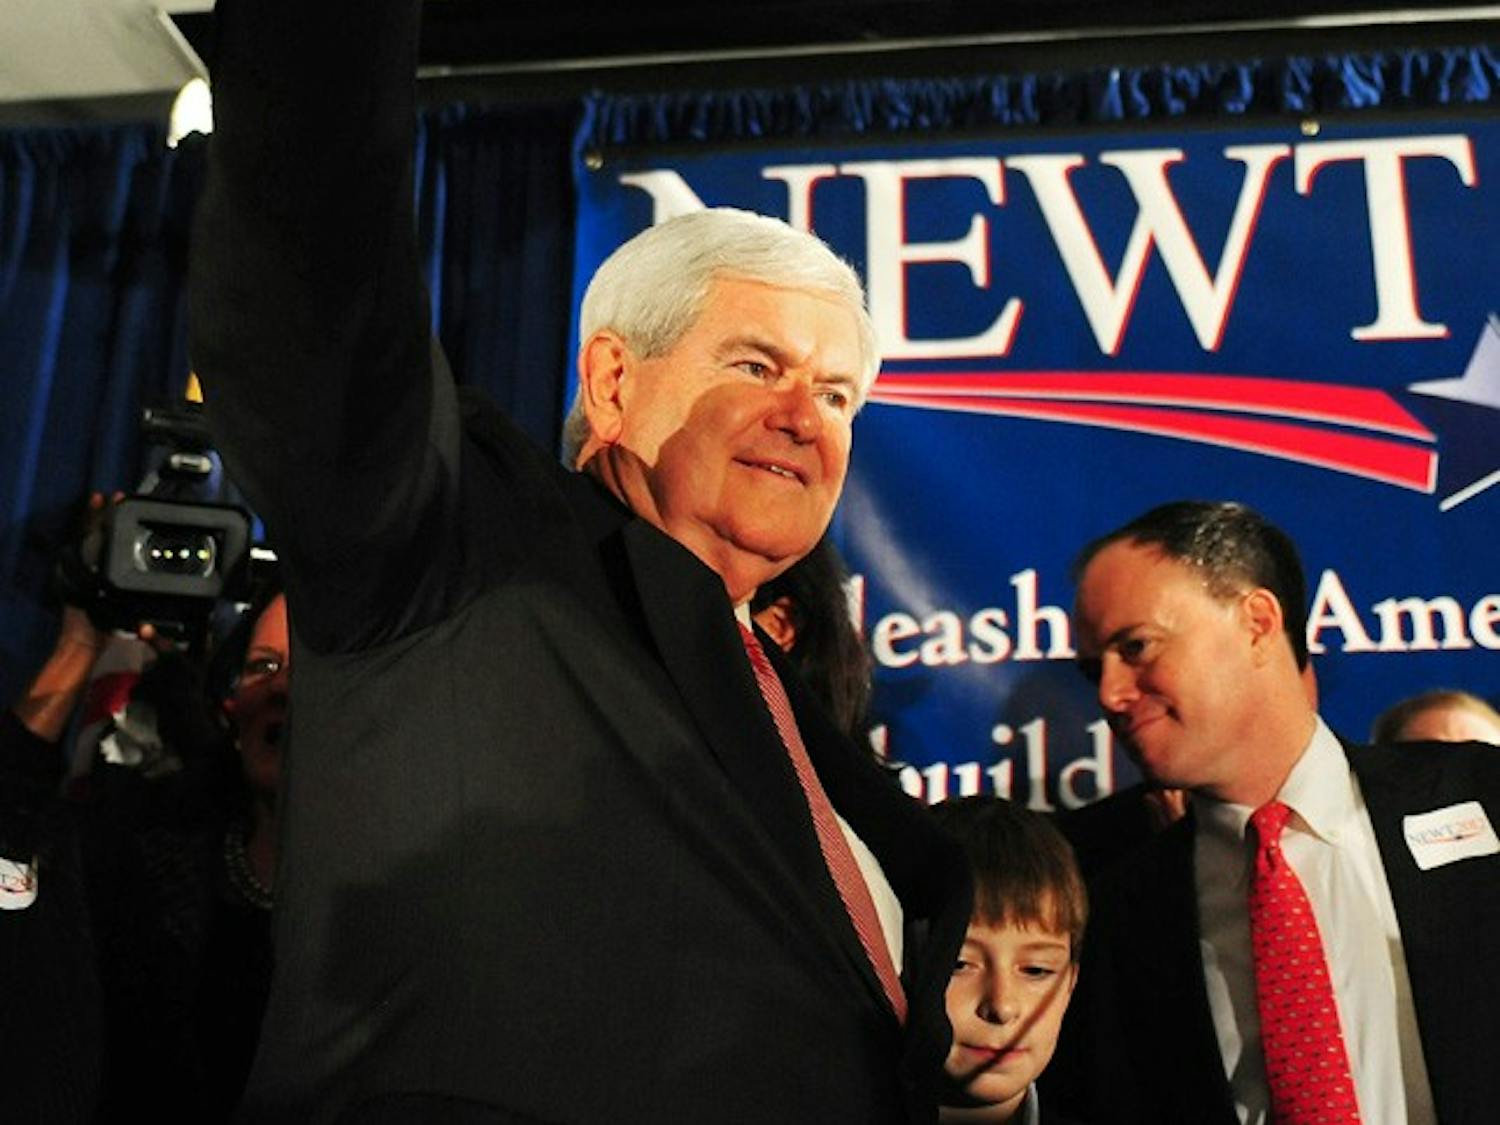 Former Speaker of the House of Representatives and Republican presidential candidate Newt Gingrich waves to supporters at the Hilton Hotel in Columbia, South Carolina, following his victory in the South Carolina Republican presidential primary, Saturday, January 21, 2012. (Jeff Siner/Charlotte Observer/MCT)